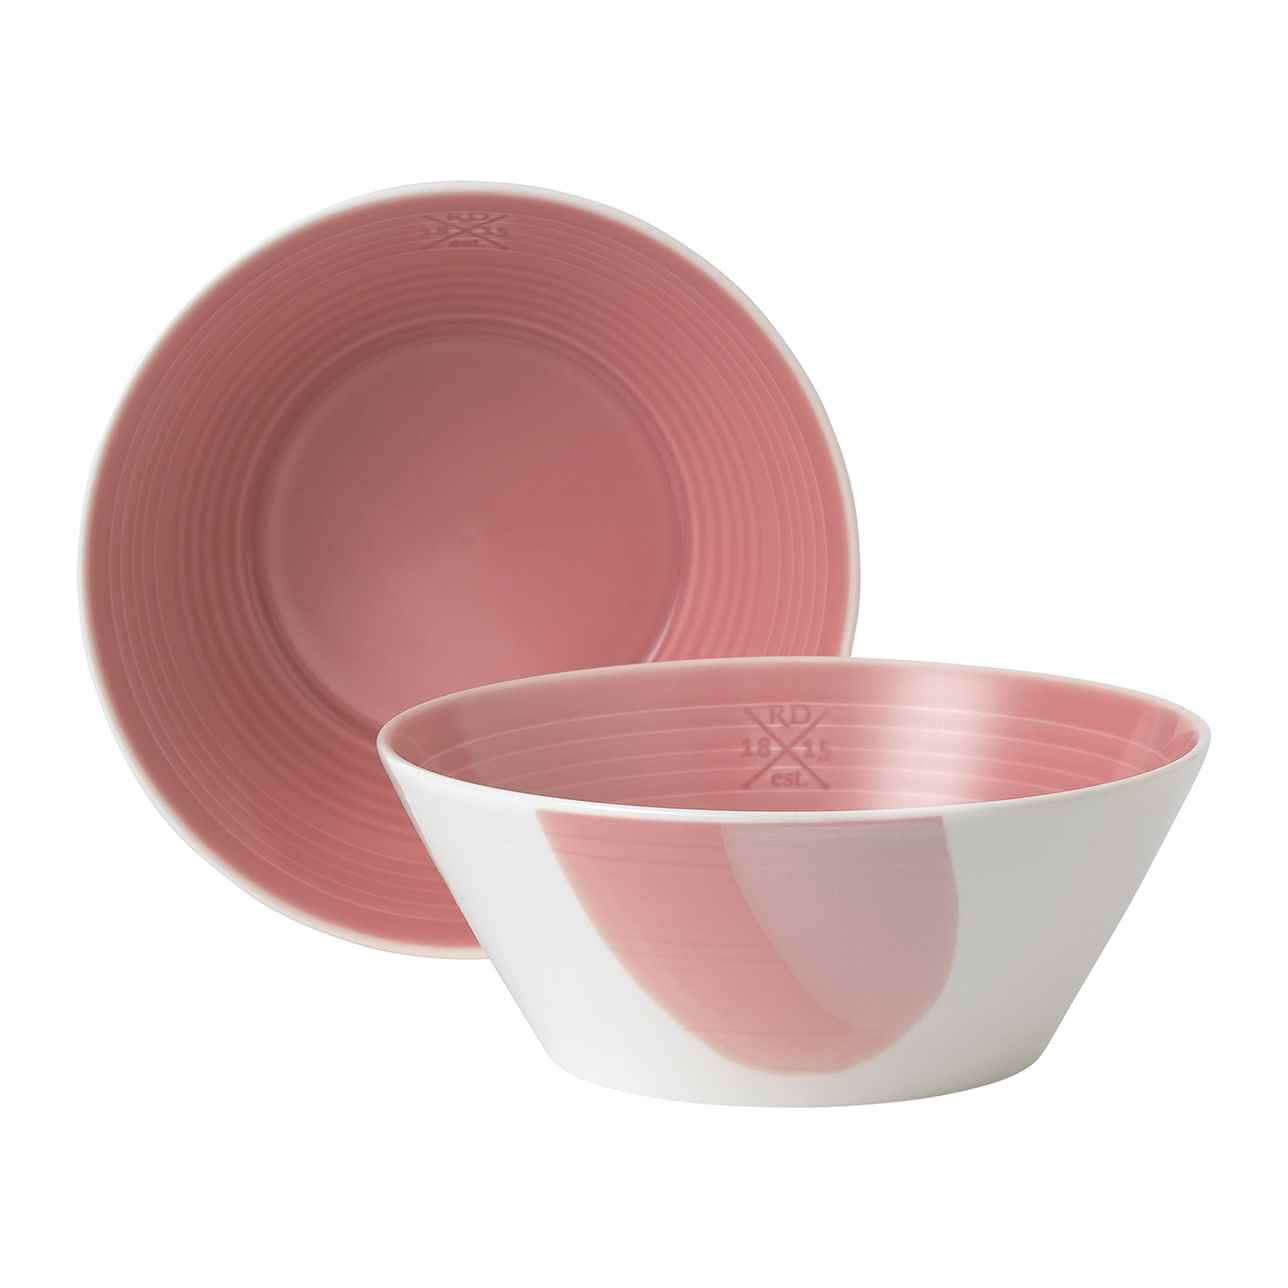 Signature 1815 Coral Cereal Bowls (Set of 2)